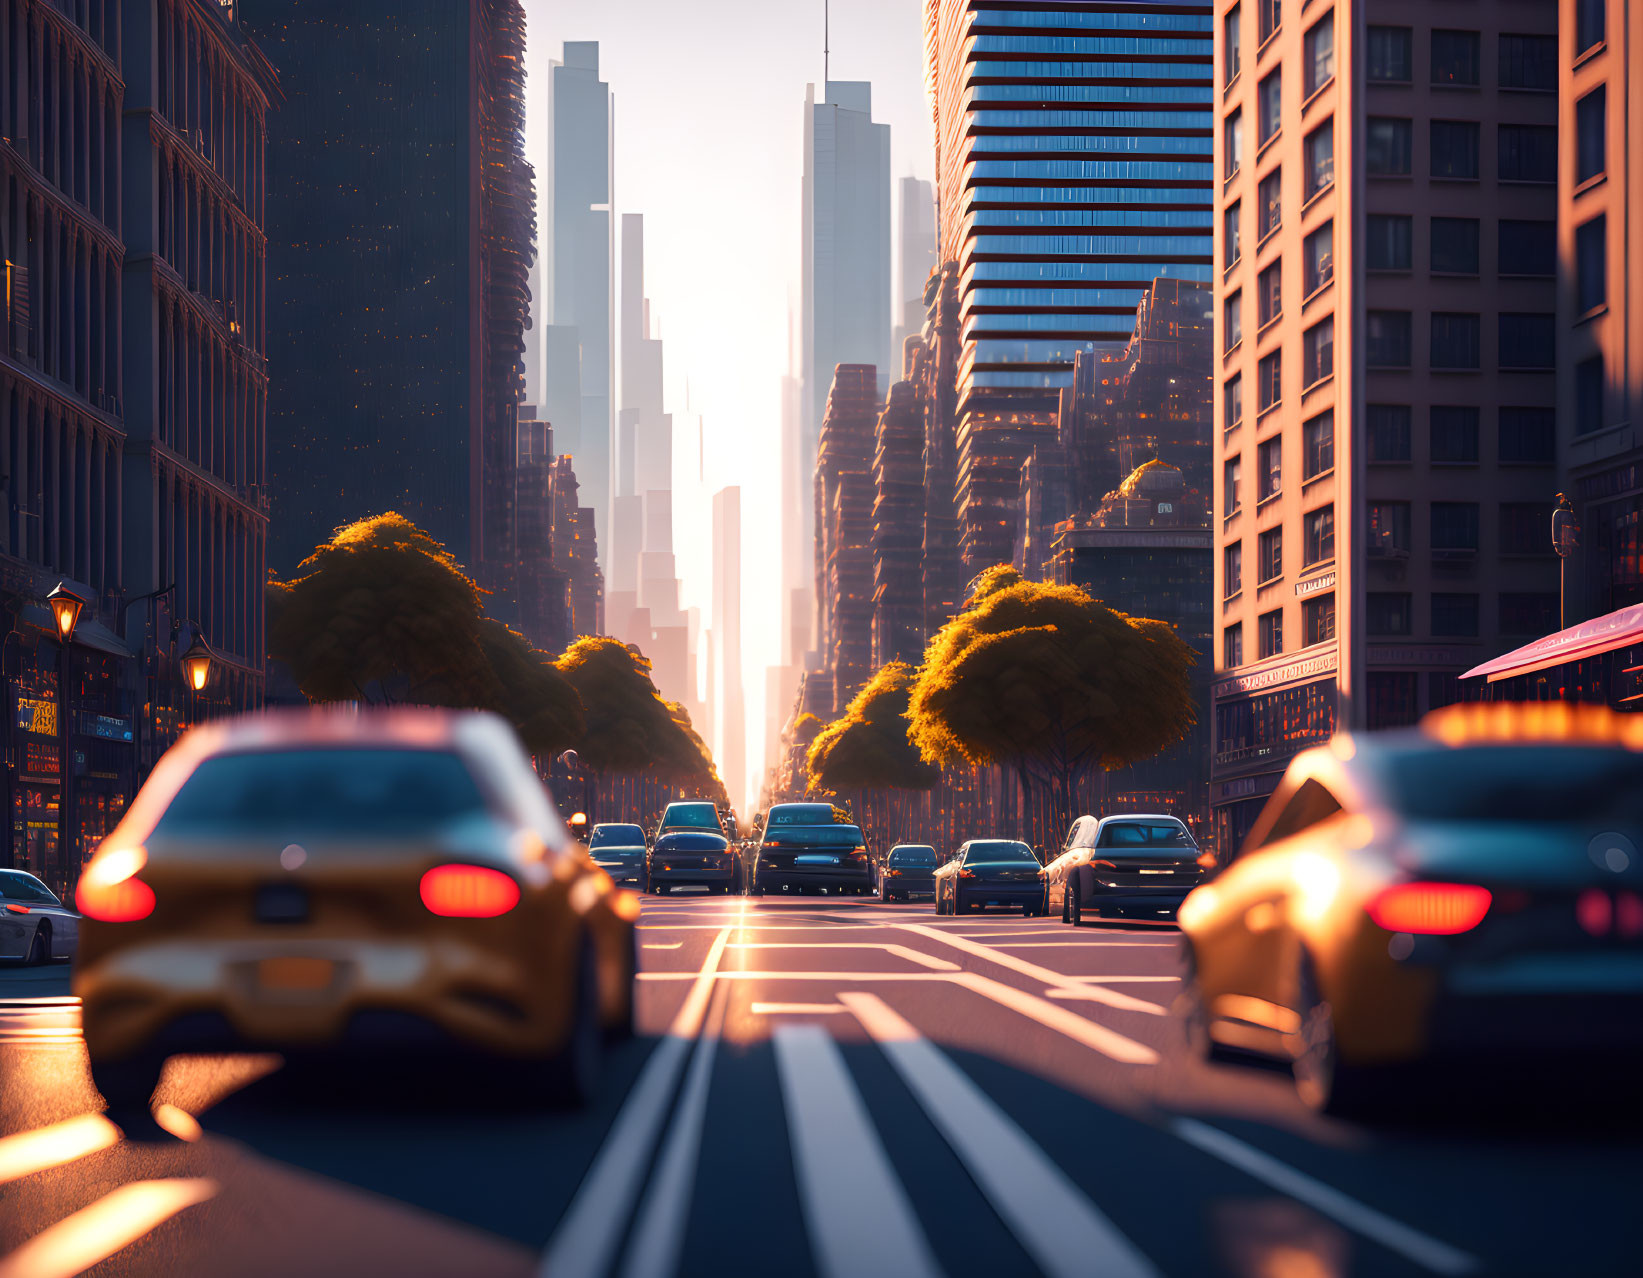 City street with cars and skyscrapers in a sunlit urban setting